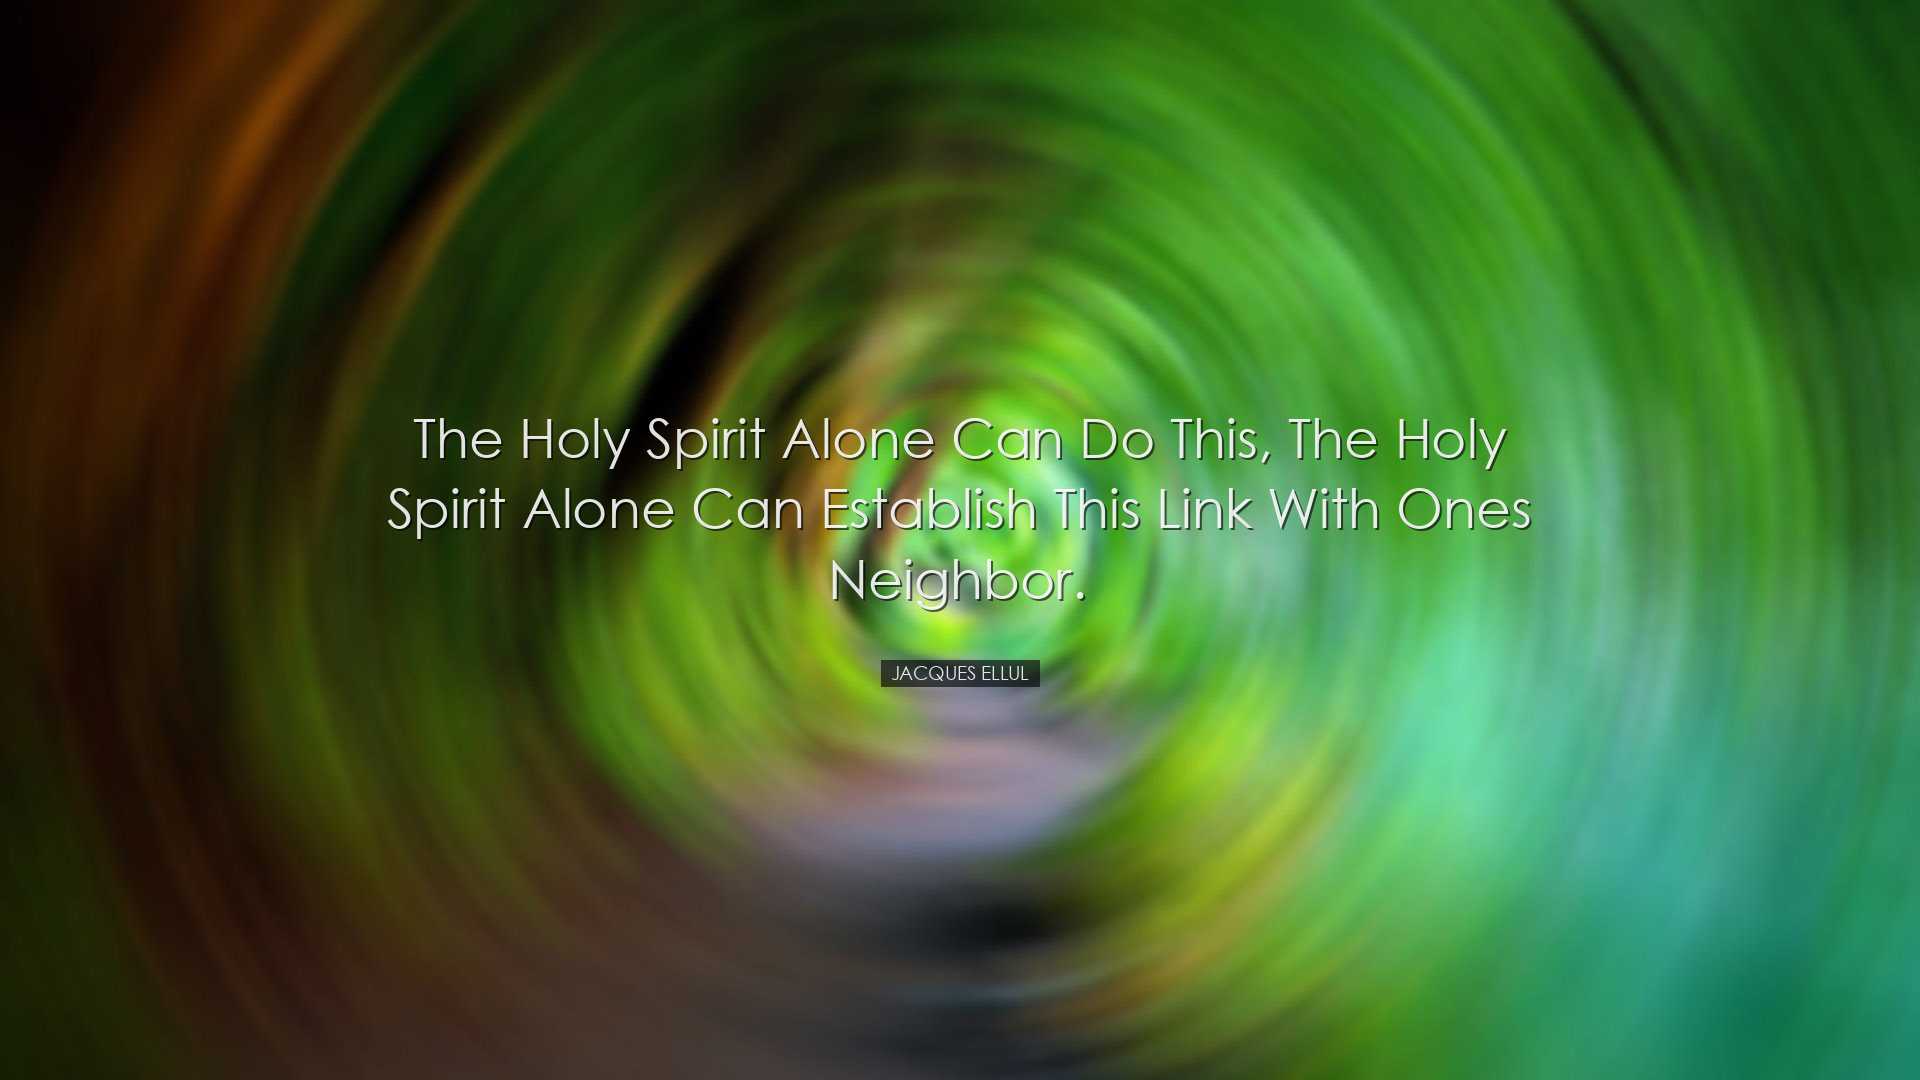 The Holy Spirit alone can do this, the Holy Spirit alone can estab